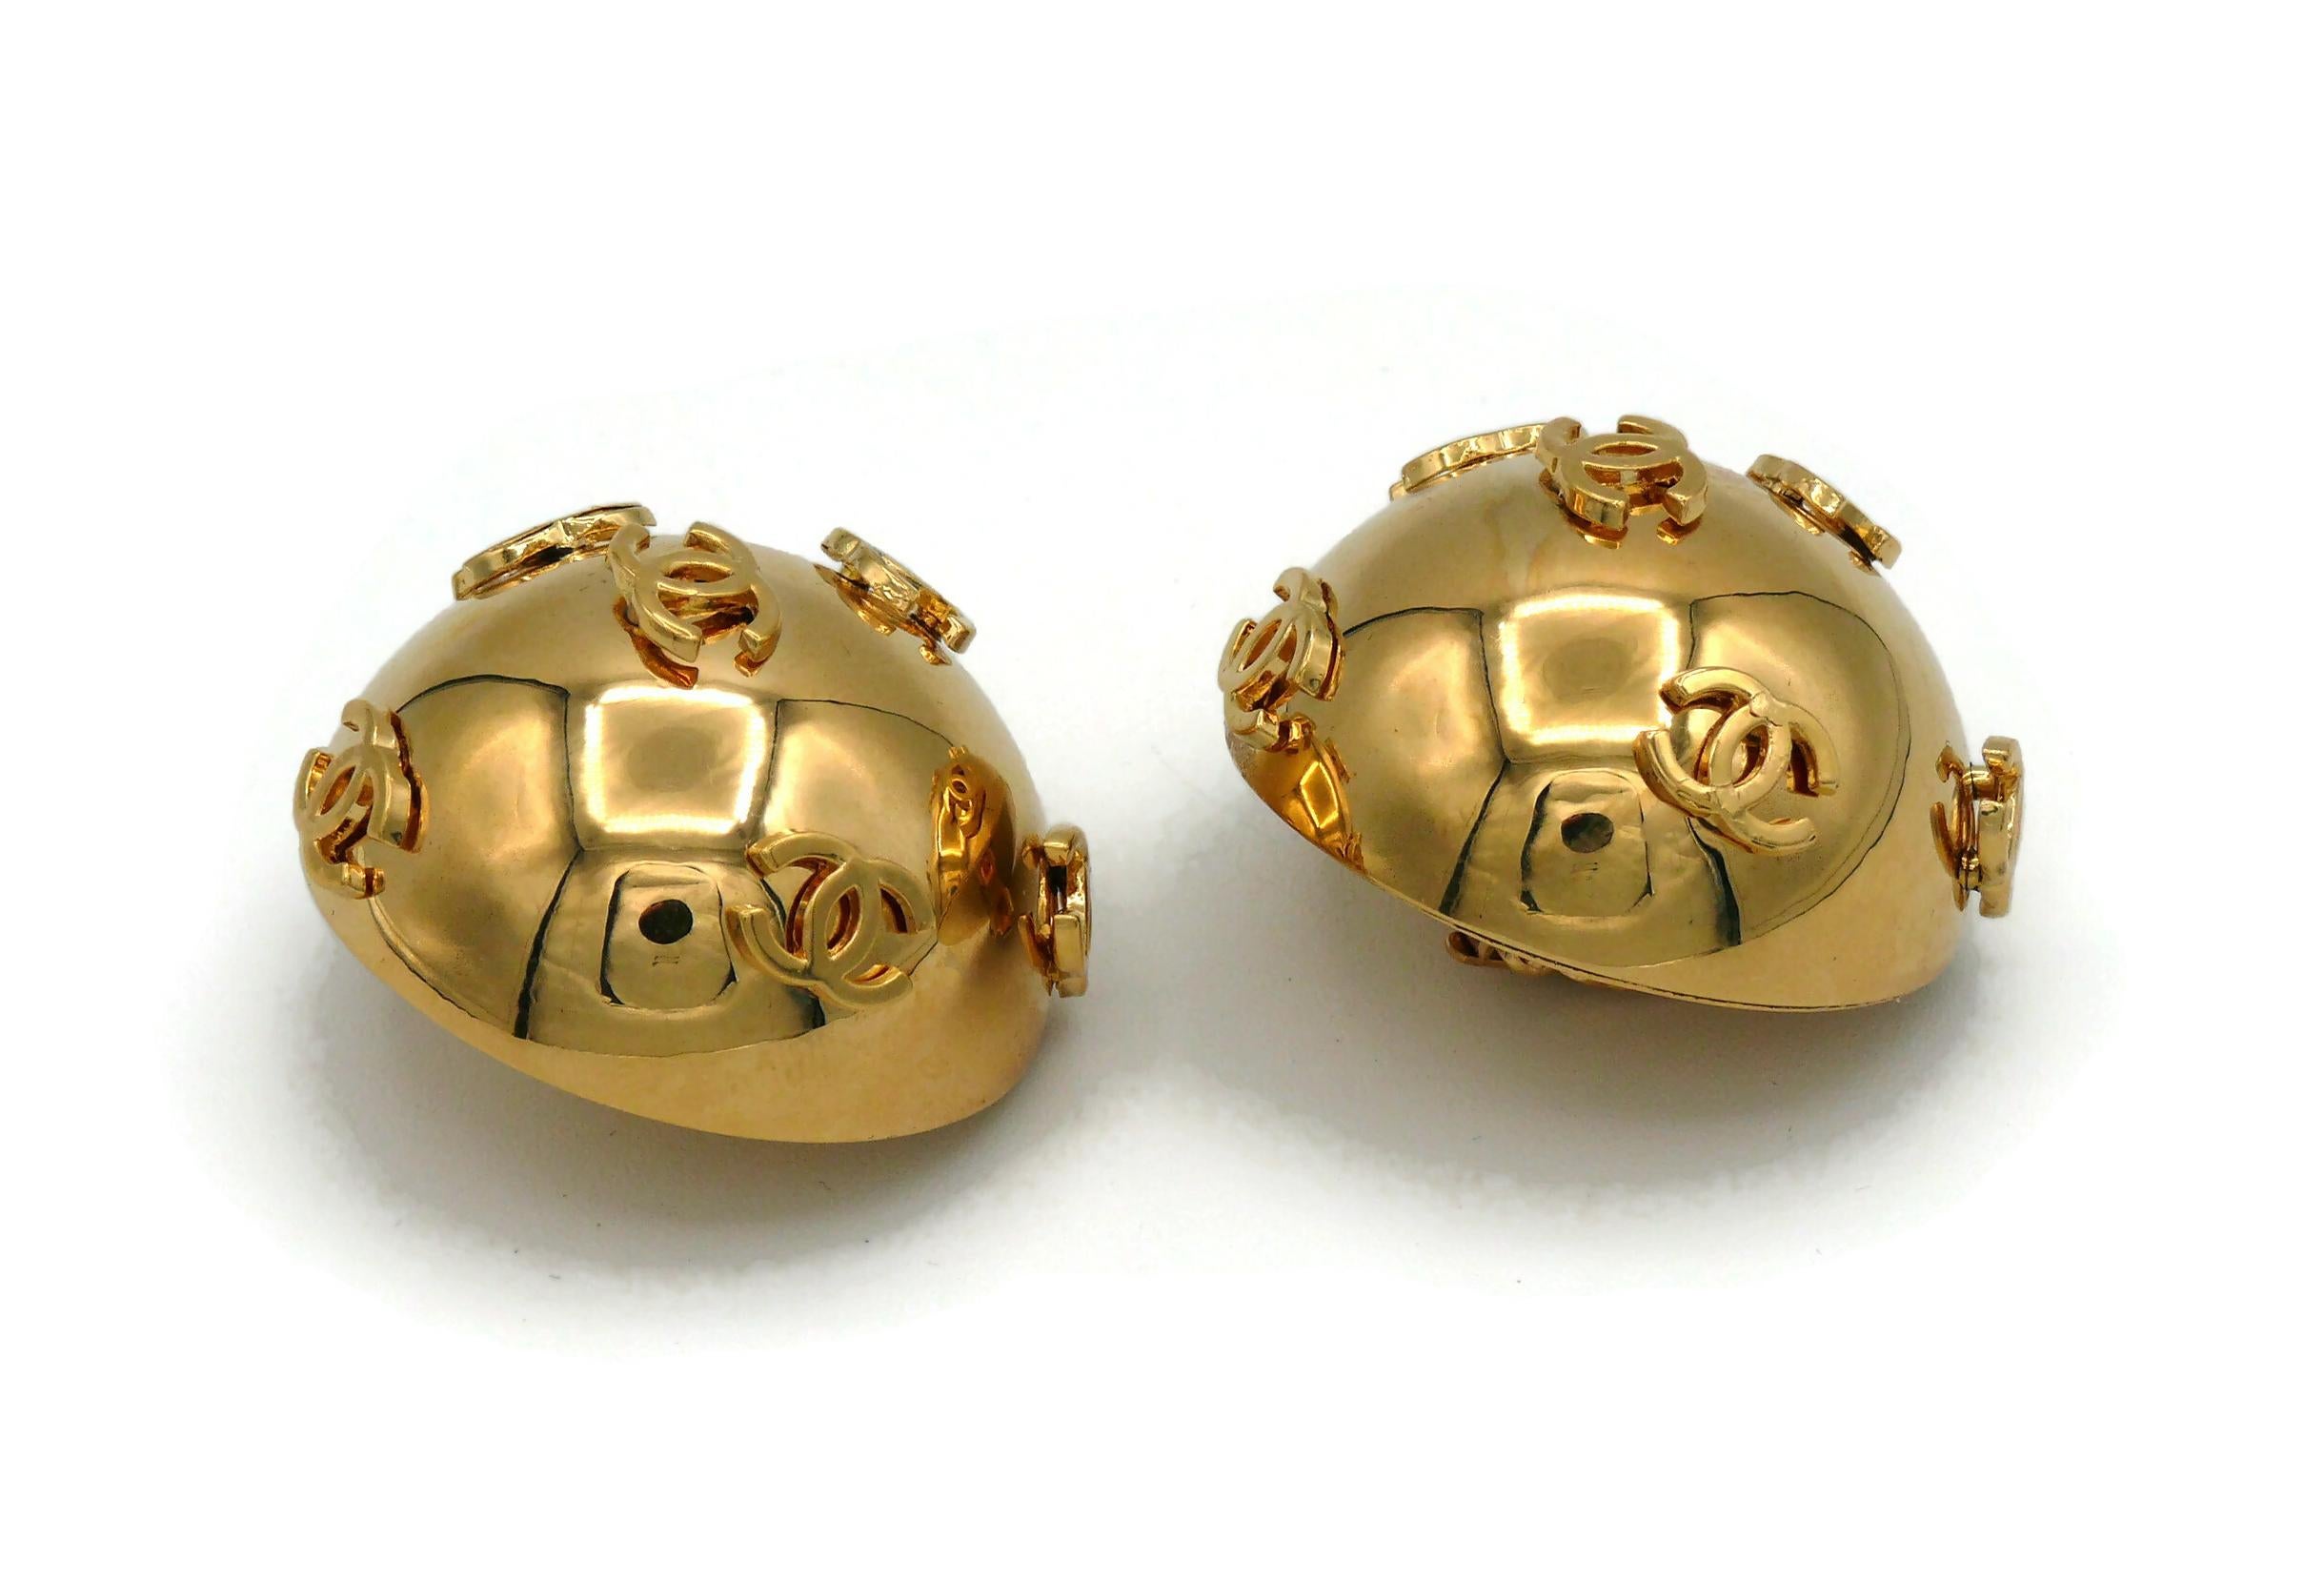 CHANEL by KARL LAGERFELD Vintage Oversized Dome CC Logos Clip-On Earrings, 1992 For Sale 1